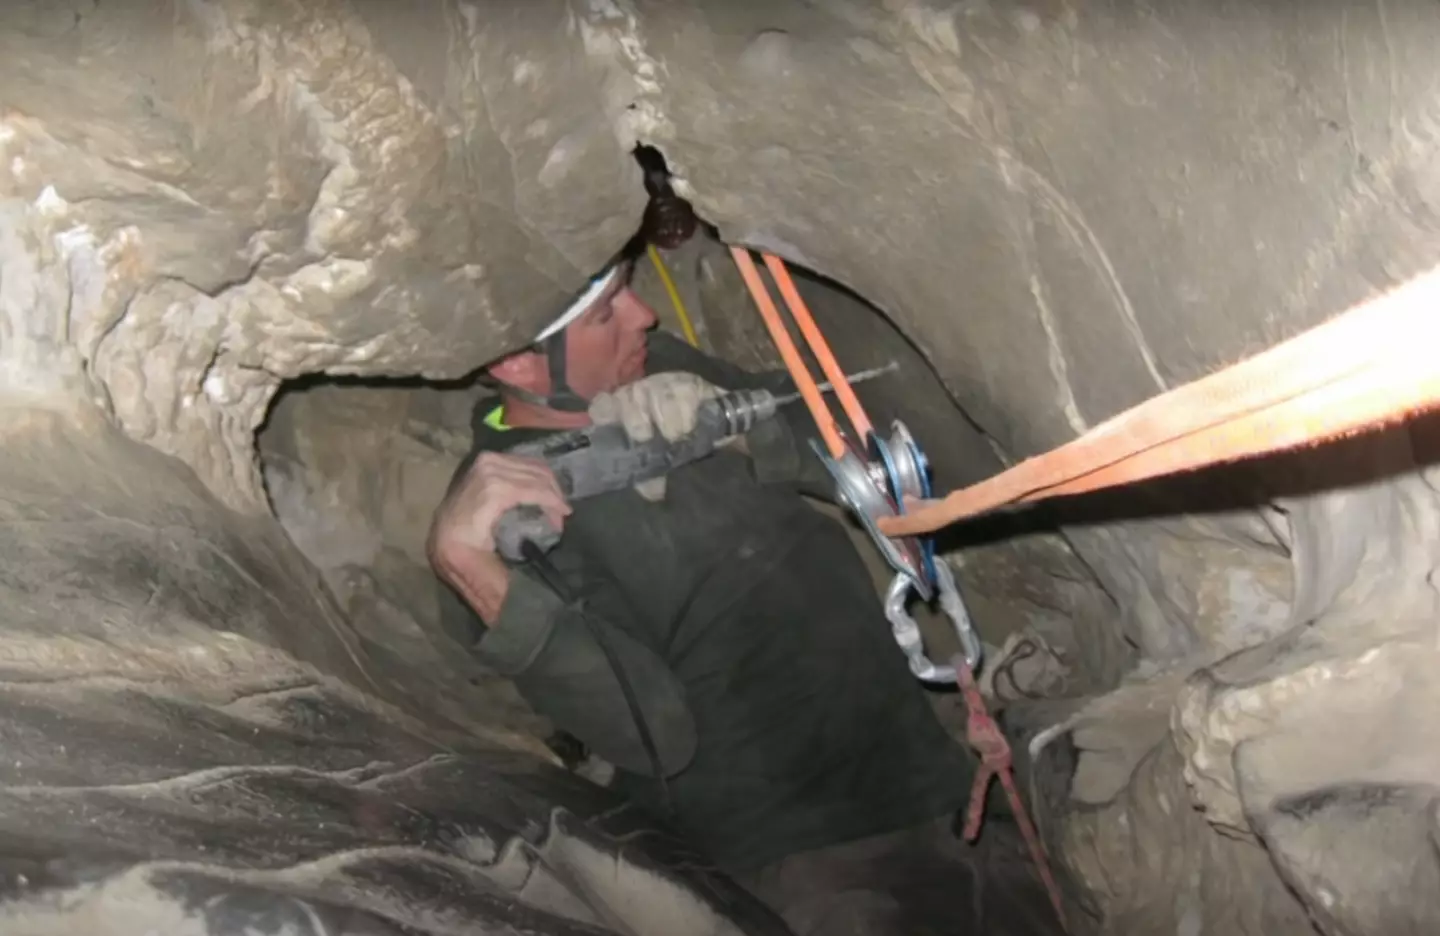 A rescuer attempted to extricate Jones from the cave.